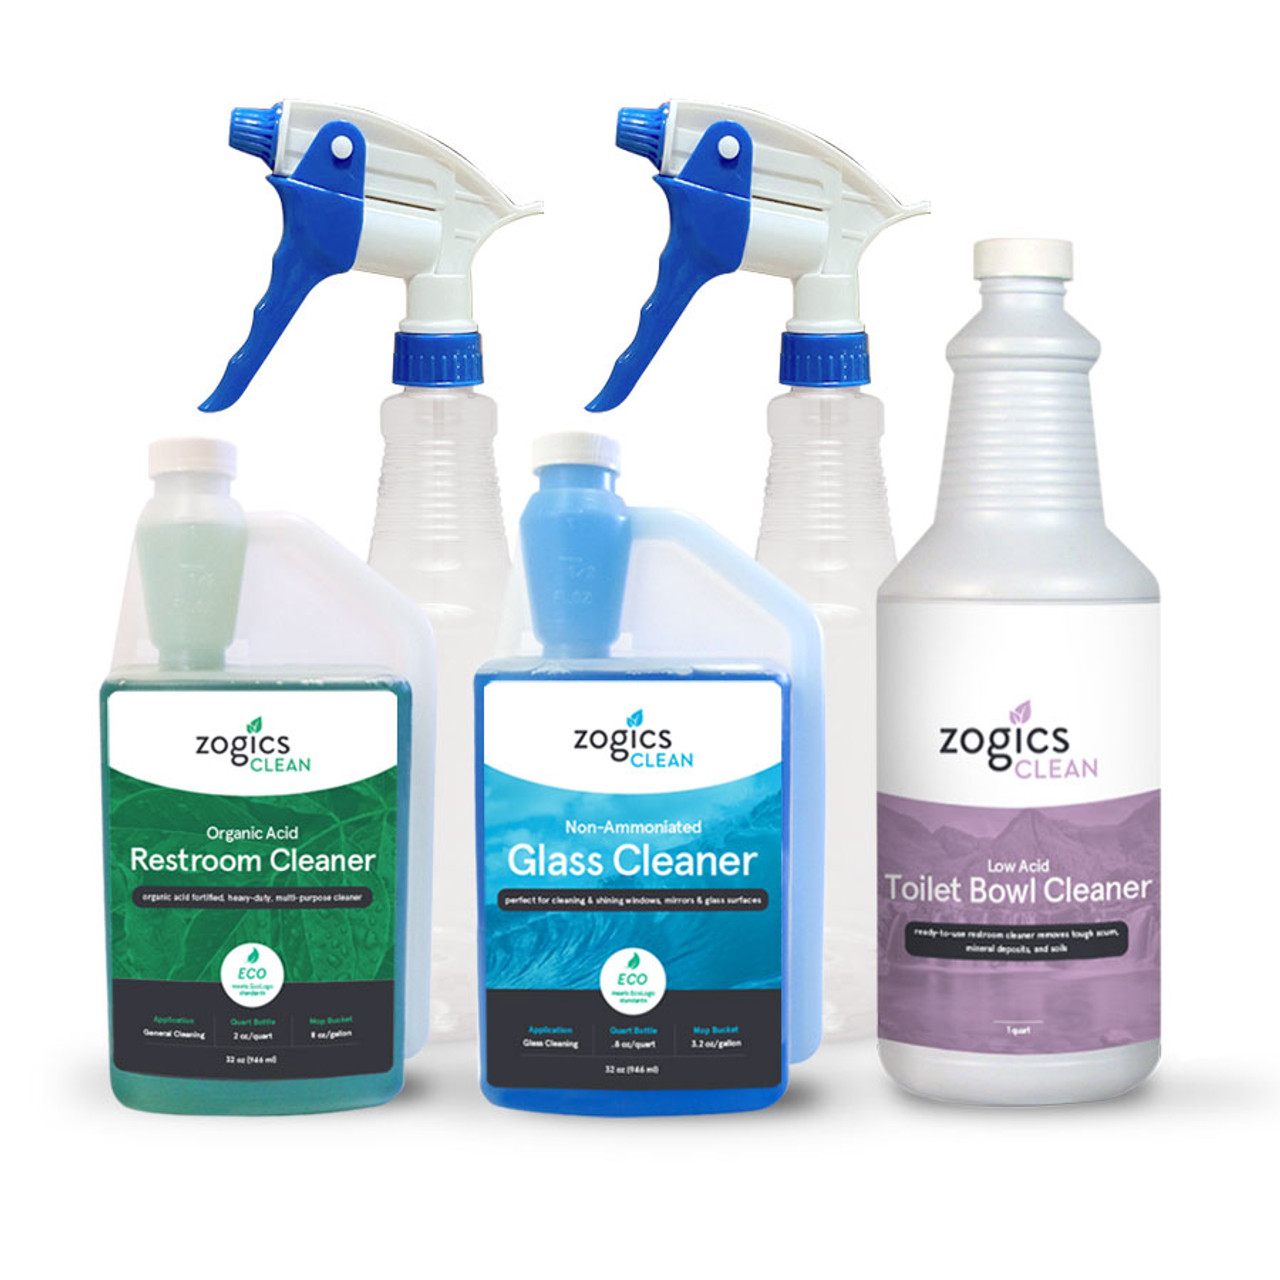 Office, School, Industrial Cleaning / Disinfecting Package (160 Items)